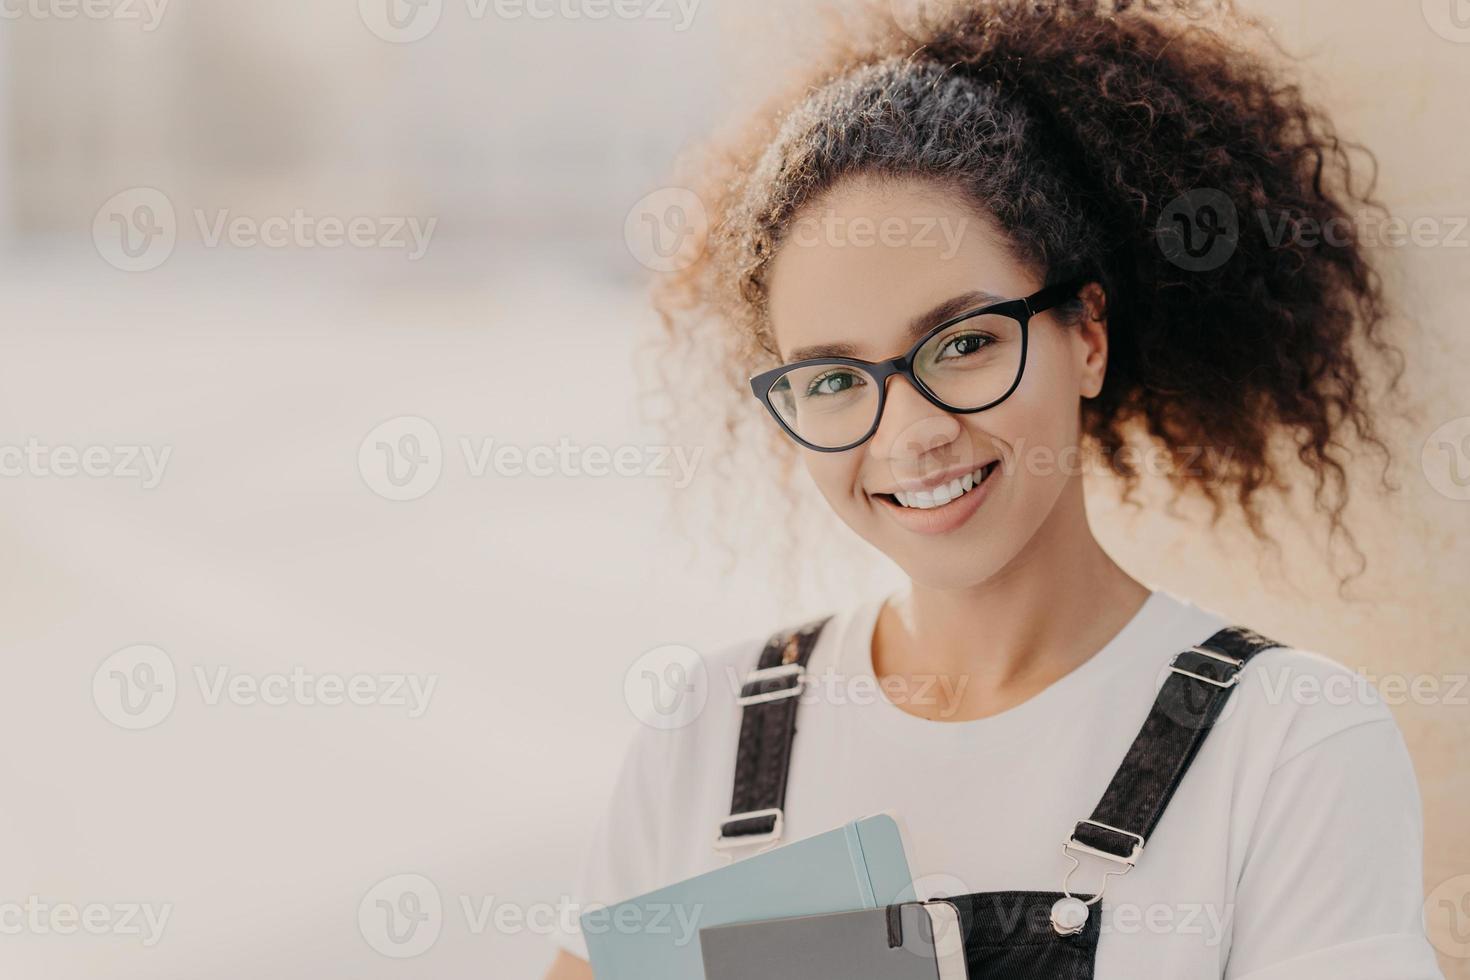 Horizontal shot of beautiful woman with crisp hair combed in pony tail, carries notepad, wears white t shirt and overalls, enjoys studying, poses against blurred background with empty space for text photo